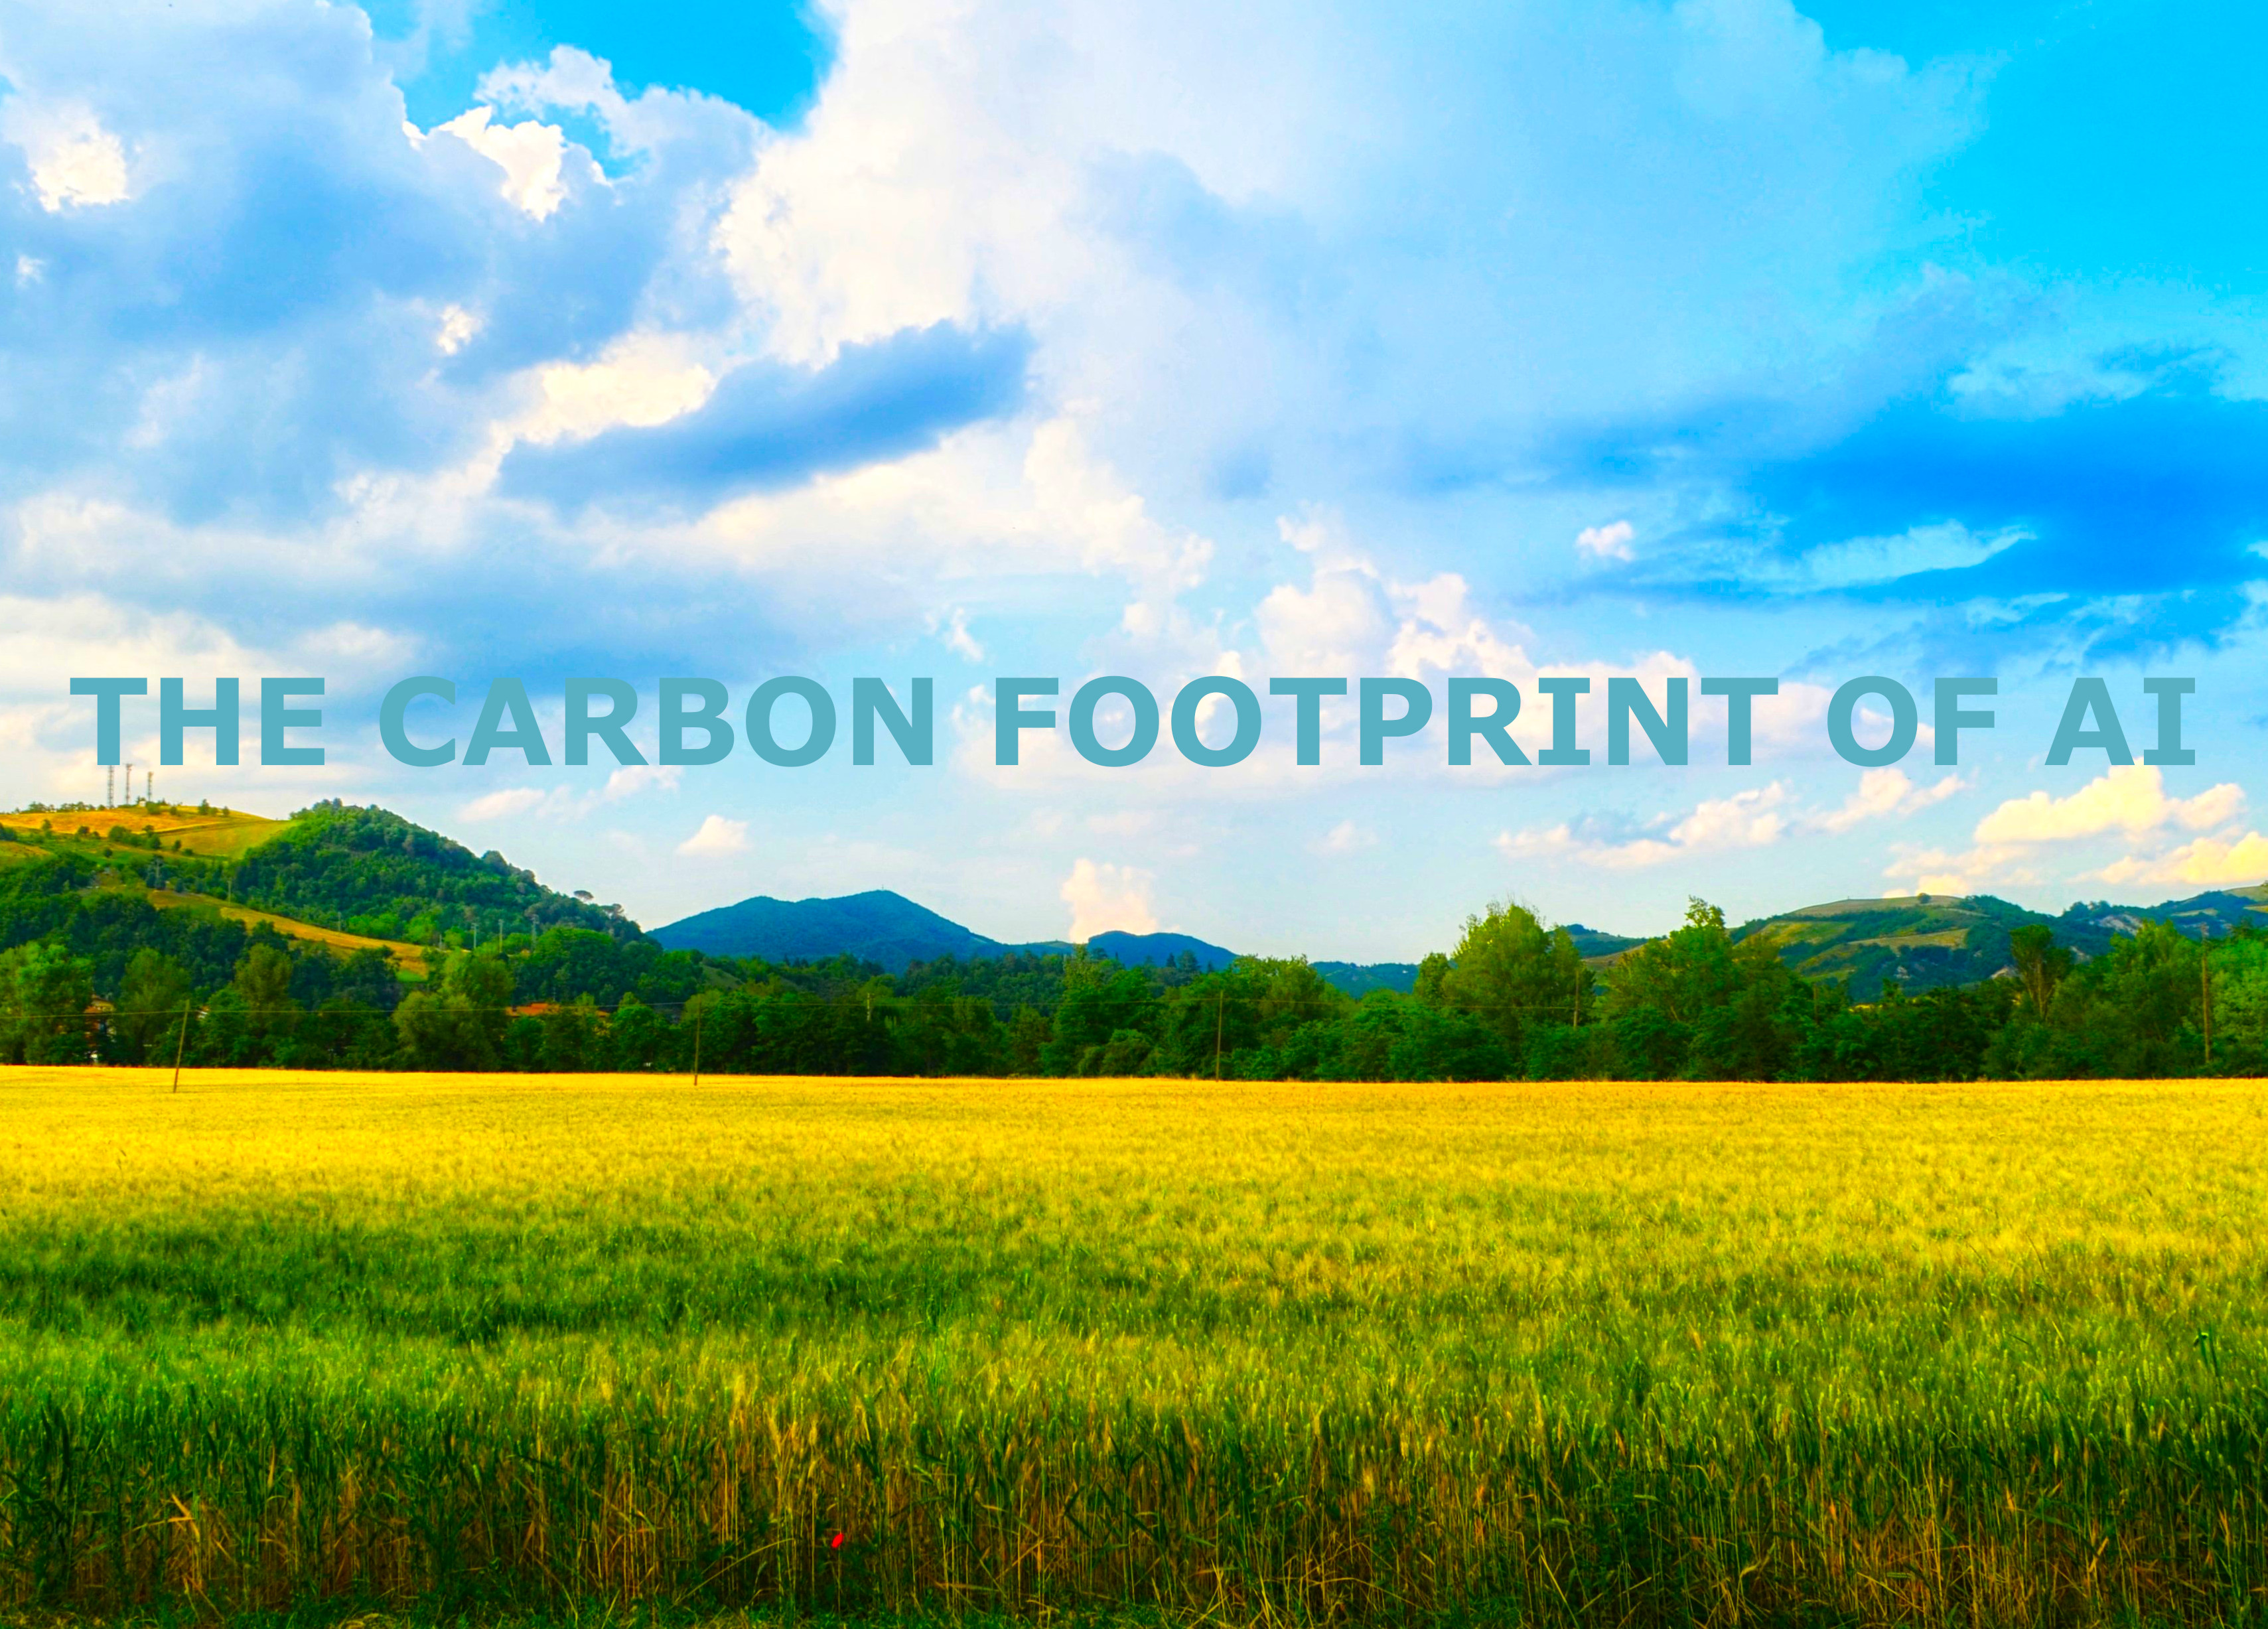 The Carbon Footprint of AI